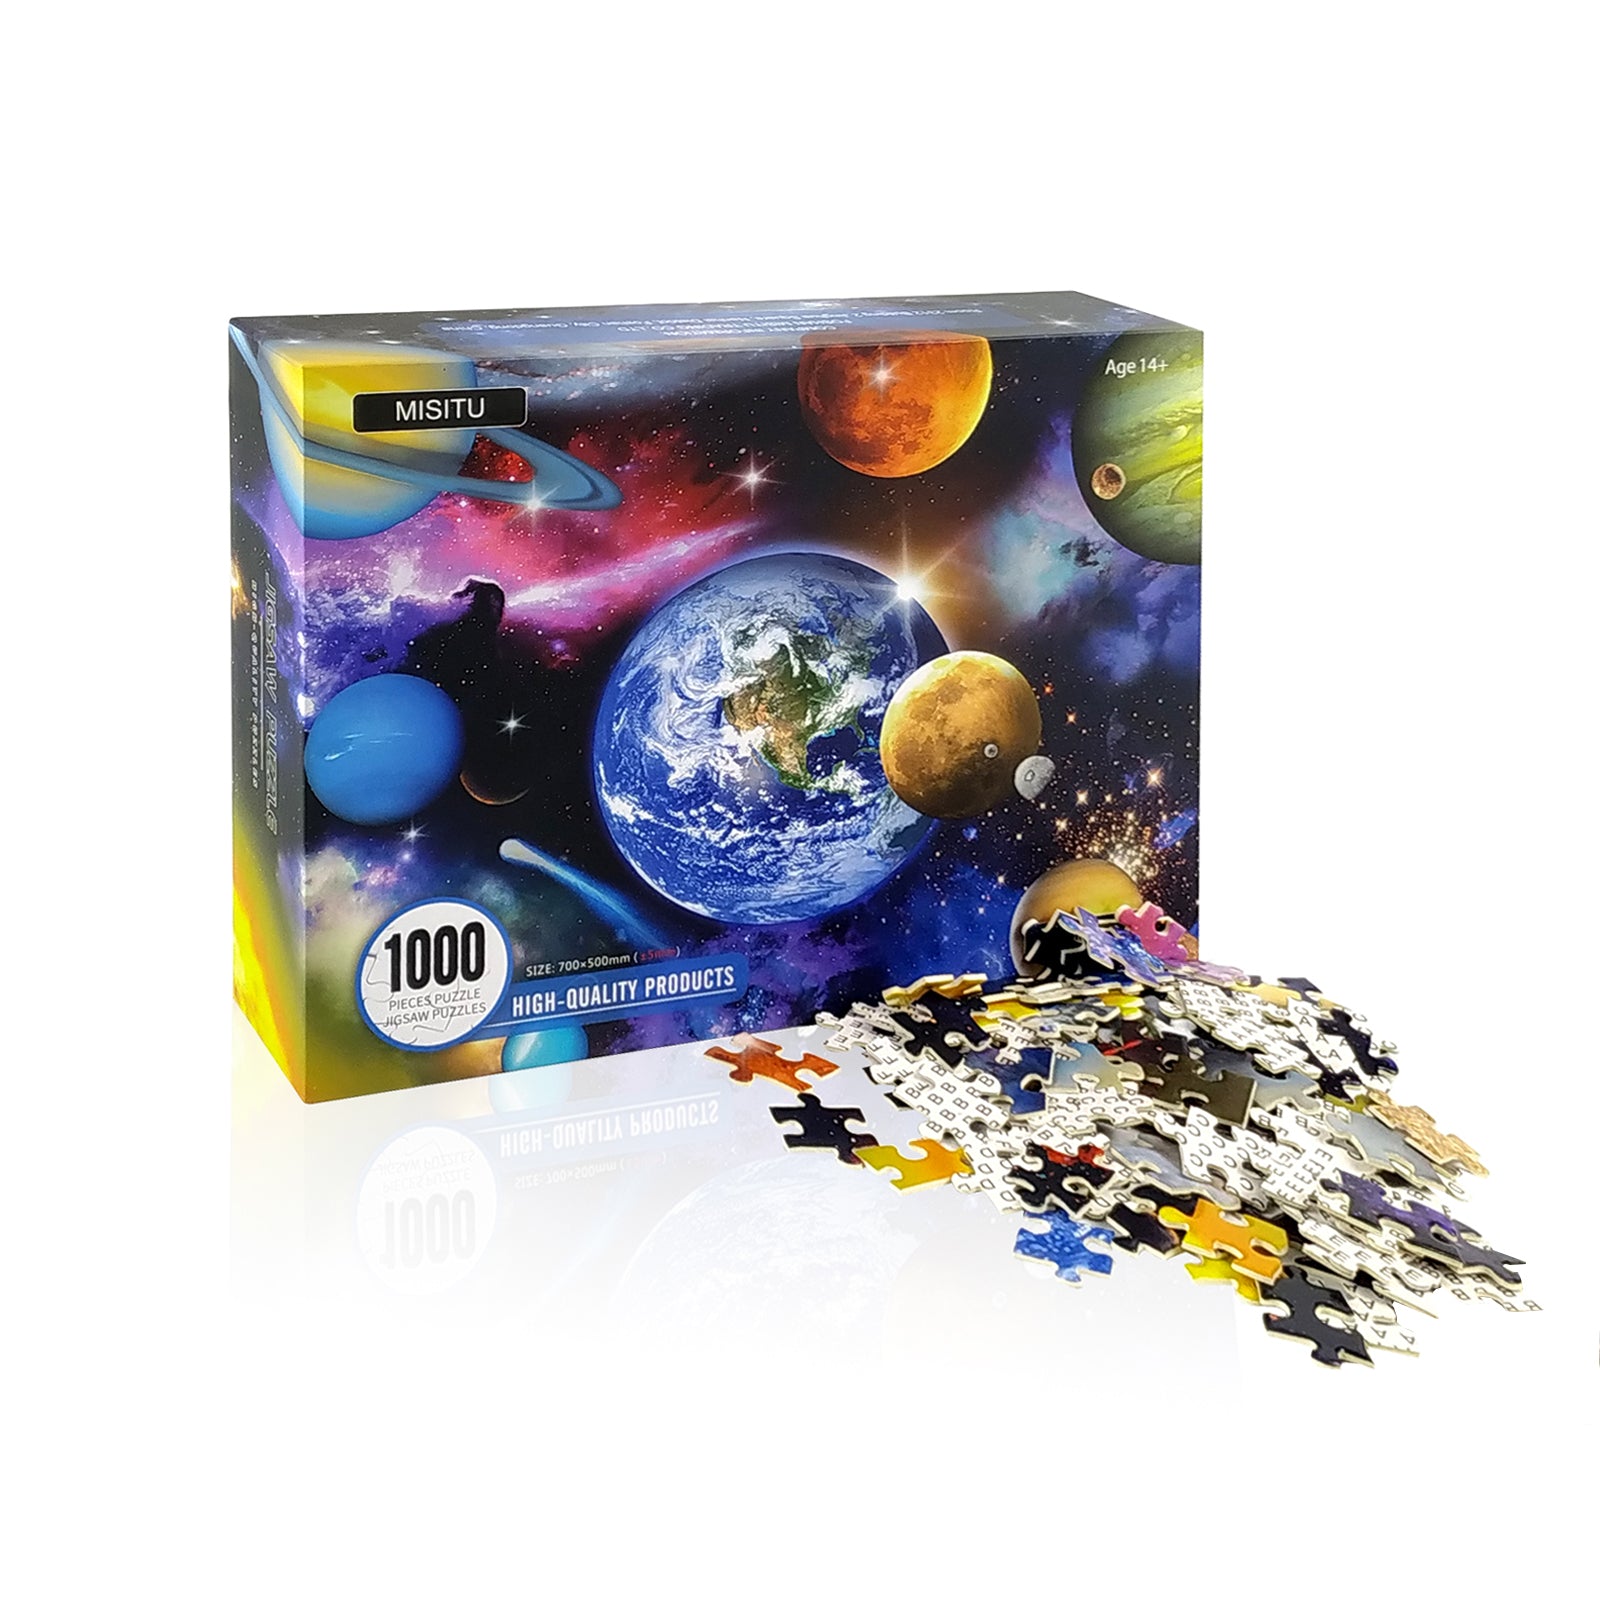 Space Planet Jigsaw Puzzles 1000 Pieces Challenge for kids and Adults